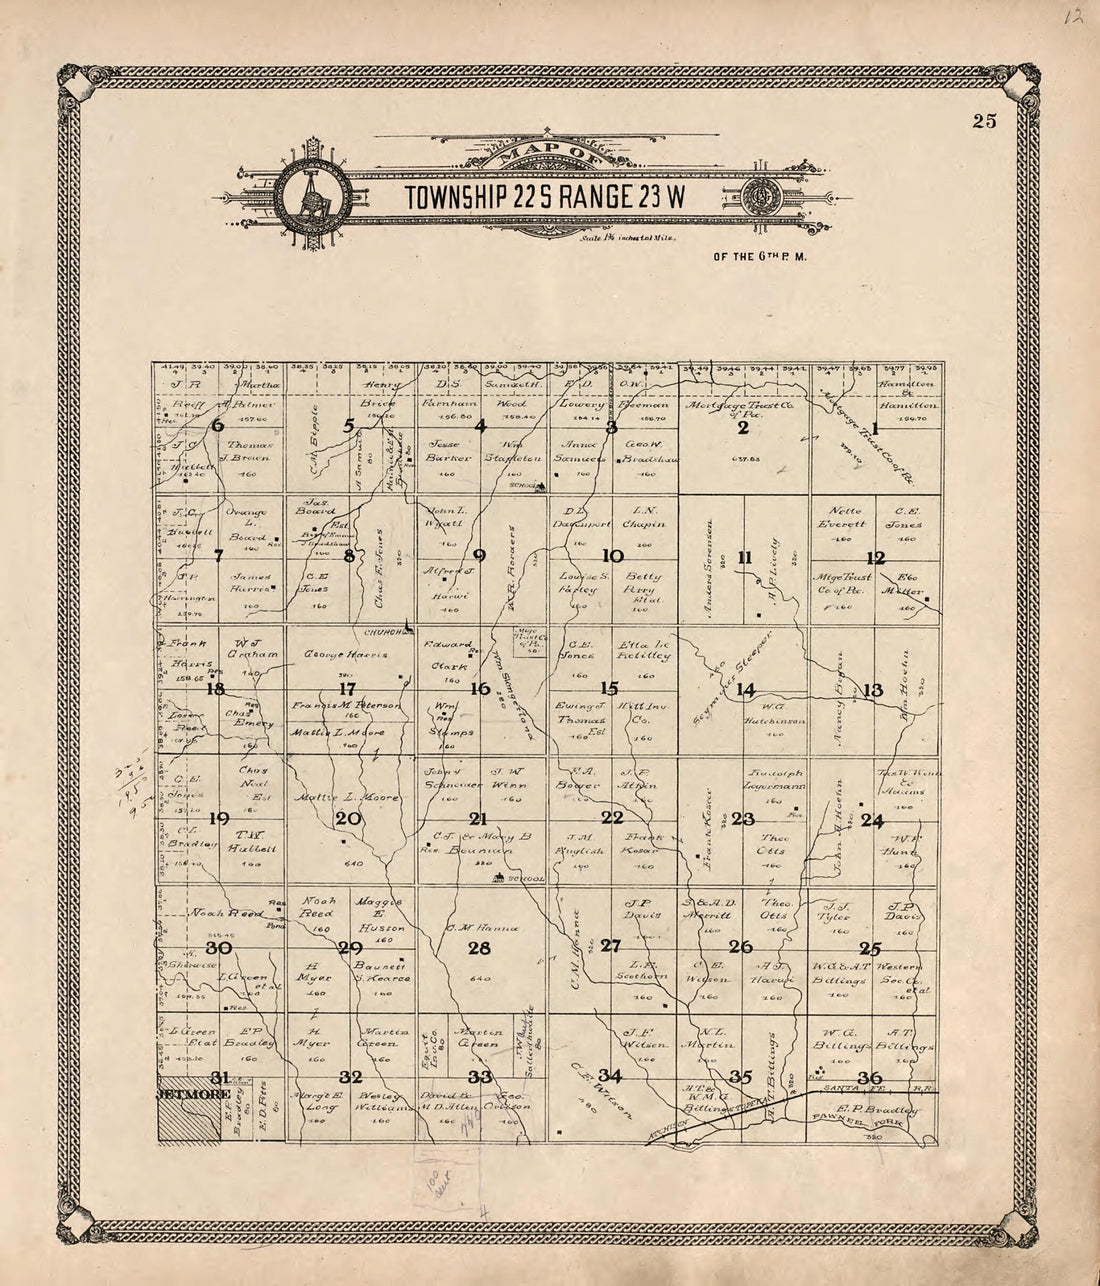 This old map of Map of Township 22 S Range 23 W from Standard Atlas of Hodgeman County, Kansas from 1907 was created by  Geo. A. Ogle &amp; Co in 1907